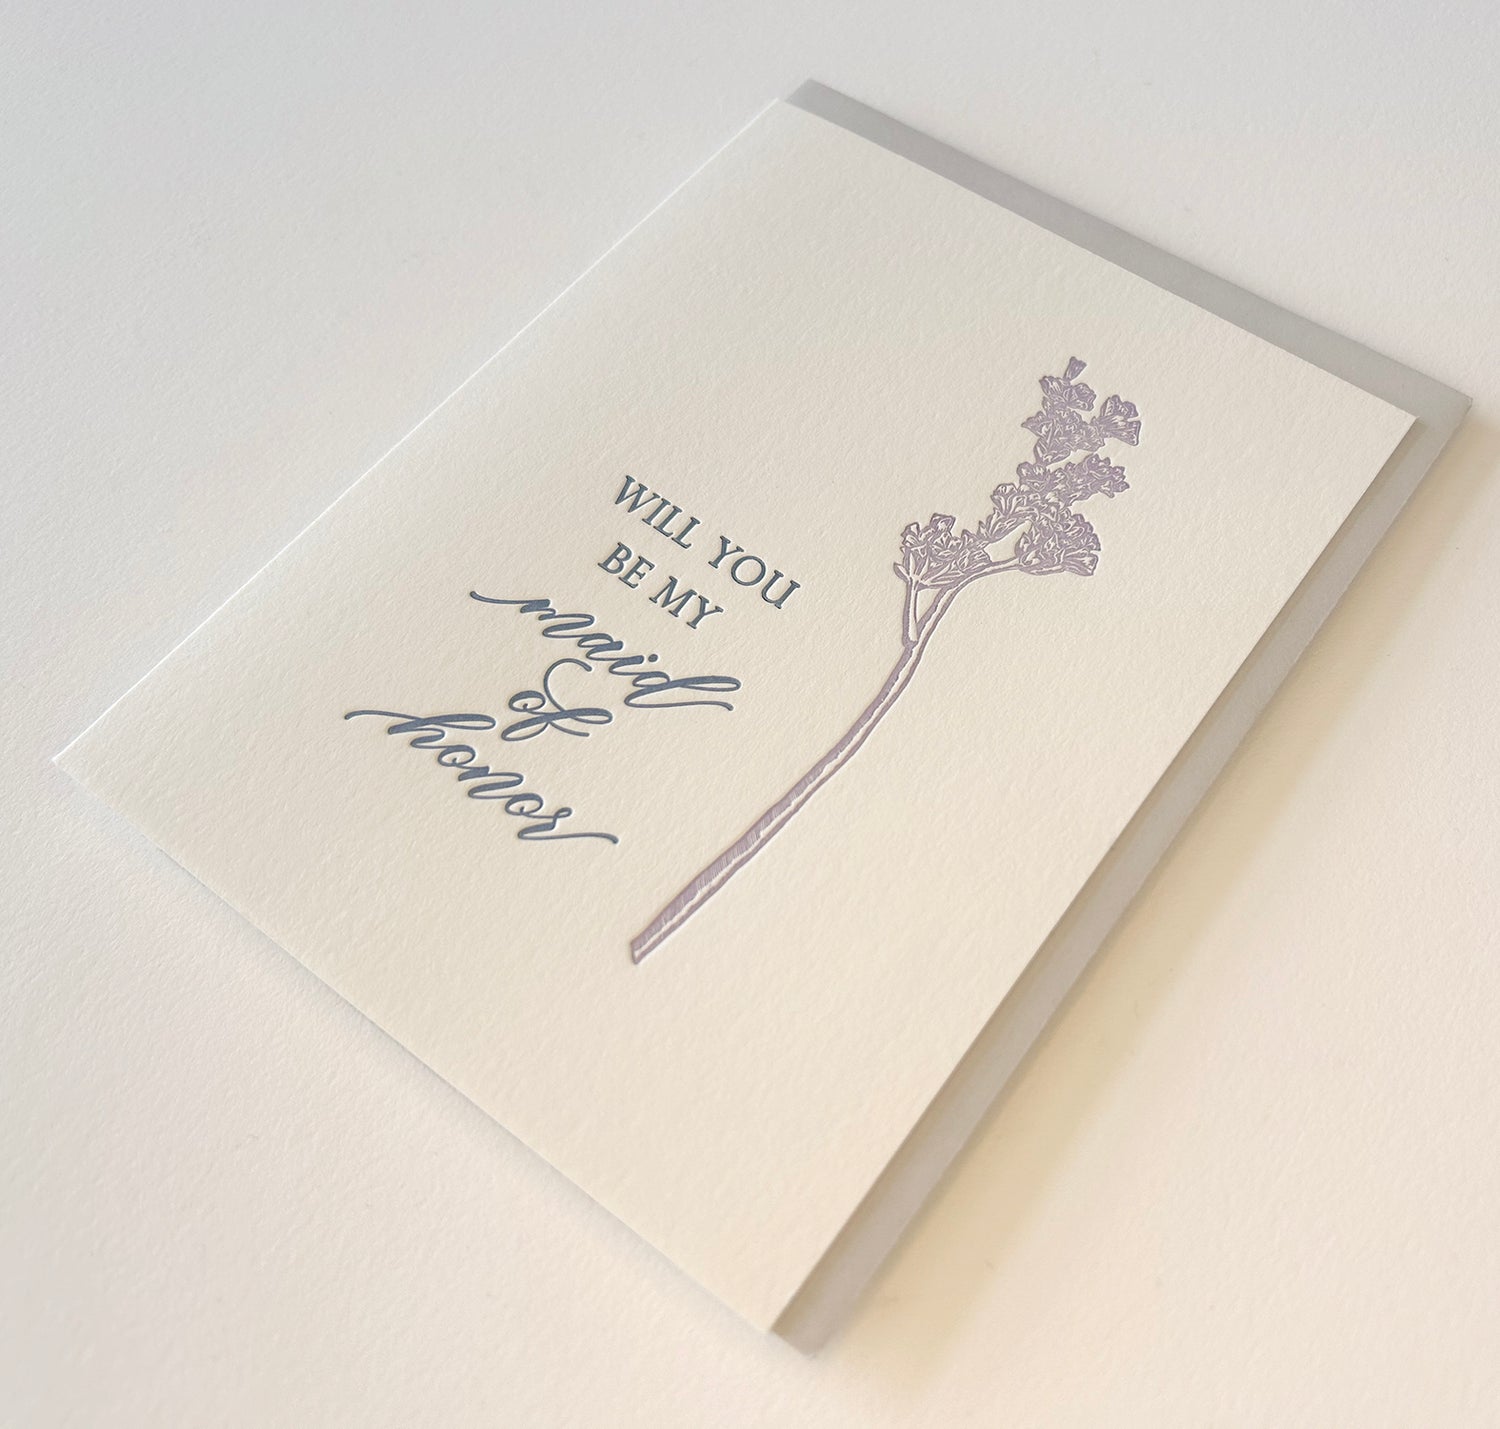 Will you be my girlfriend? | Greeting Card